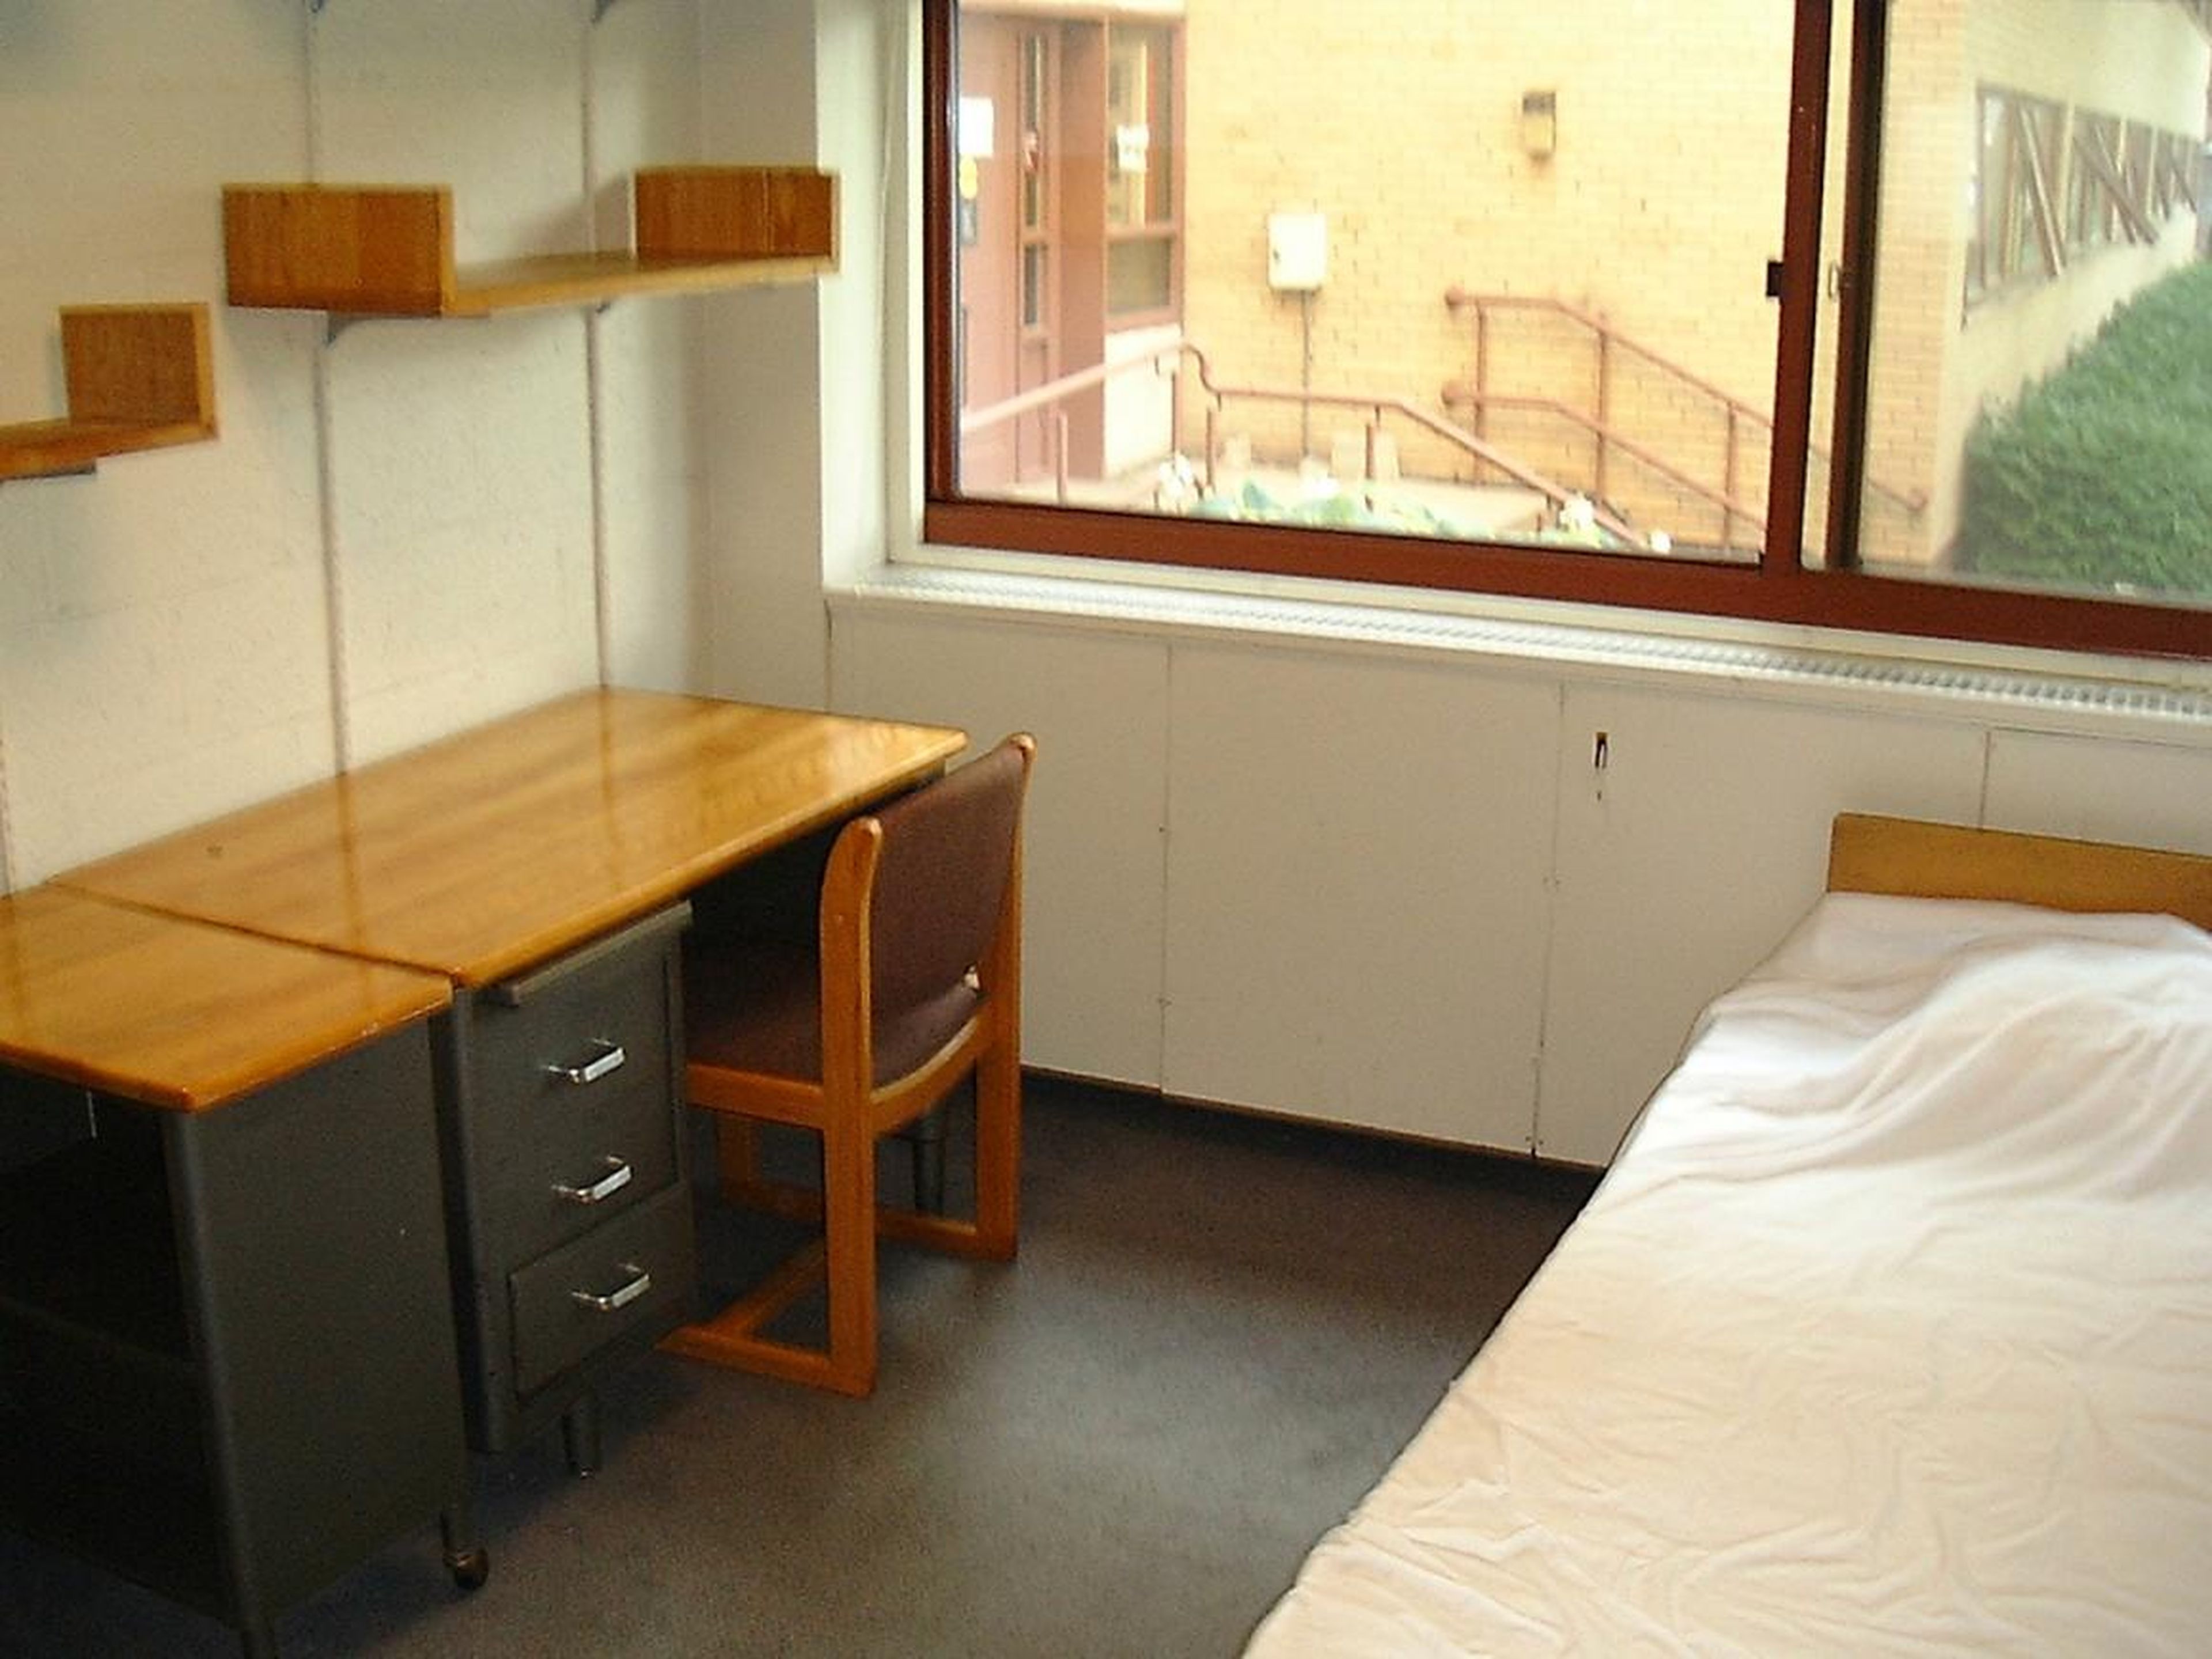 Gropius units are also some of the cheapest options on-campus, with semester prices between $3,000 and $6,000.